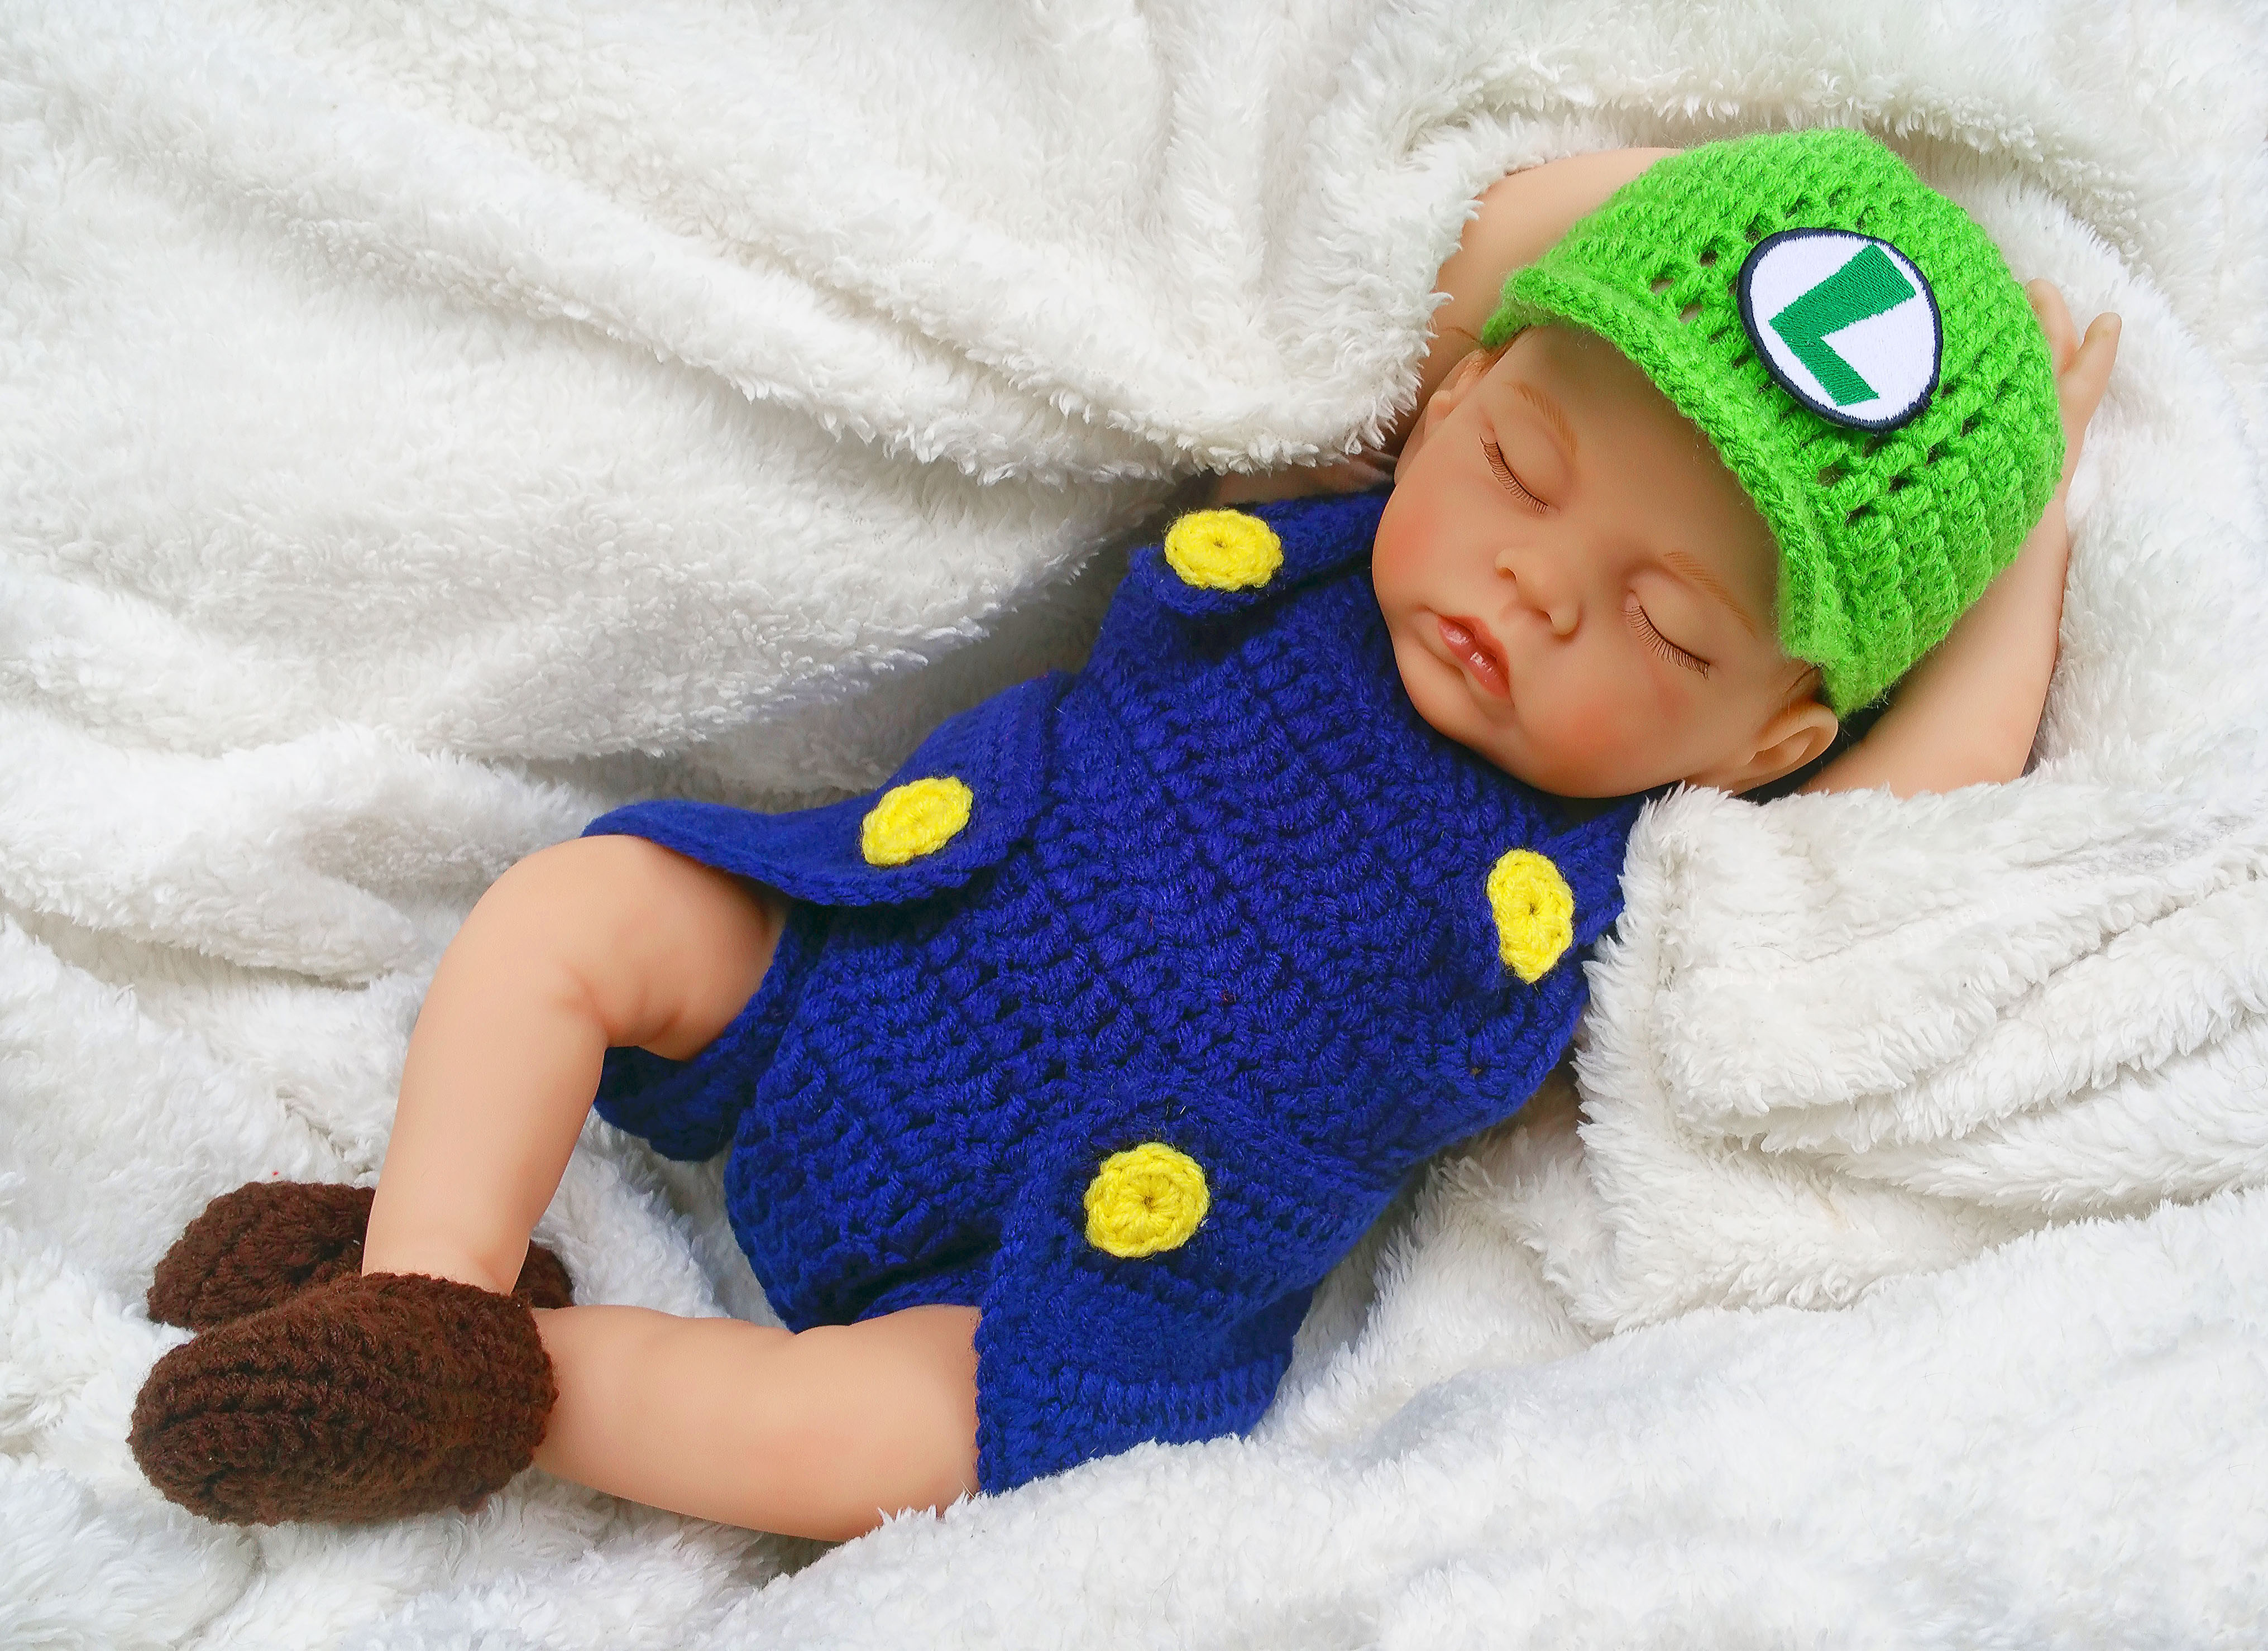 Green Plumber Brother,Baby Photo Prop,Baby Crochet Outfit,Baby Boy Costume,Crochet Baby Boy 